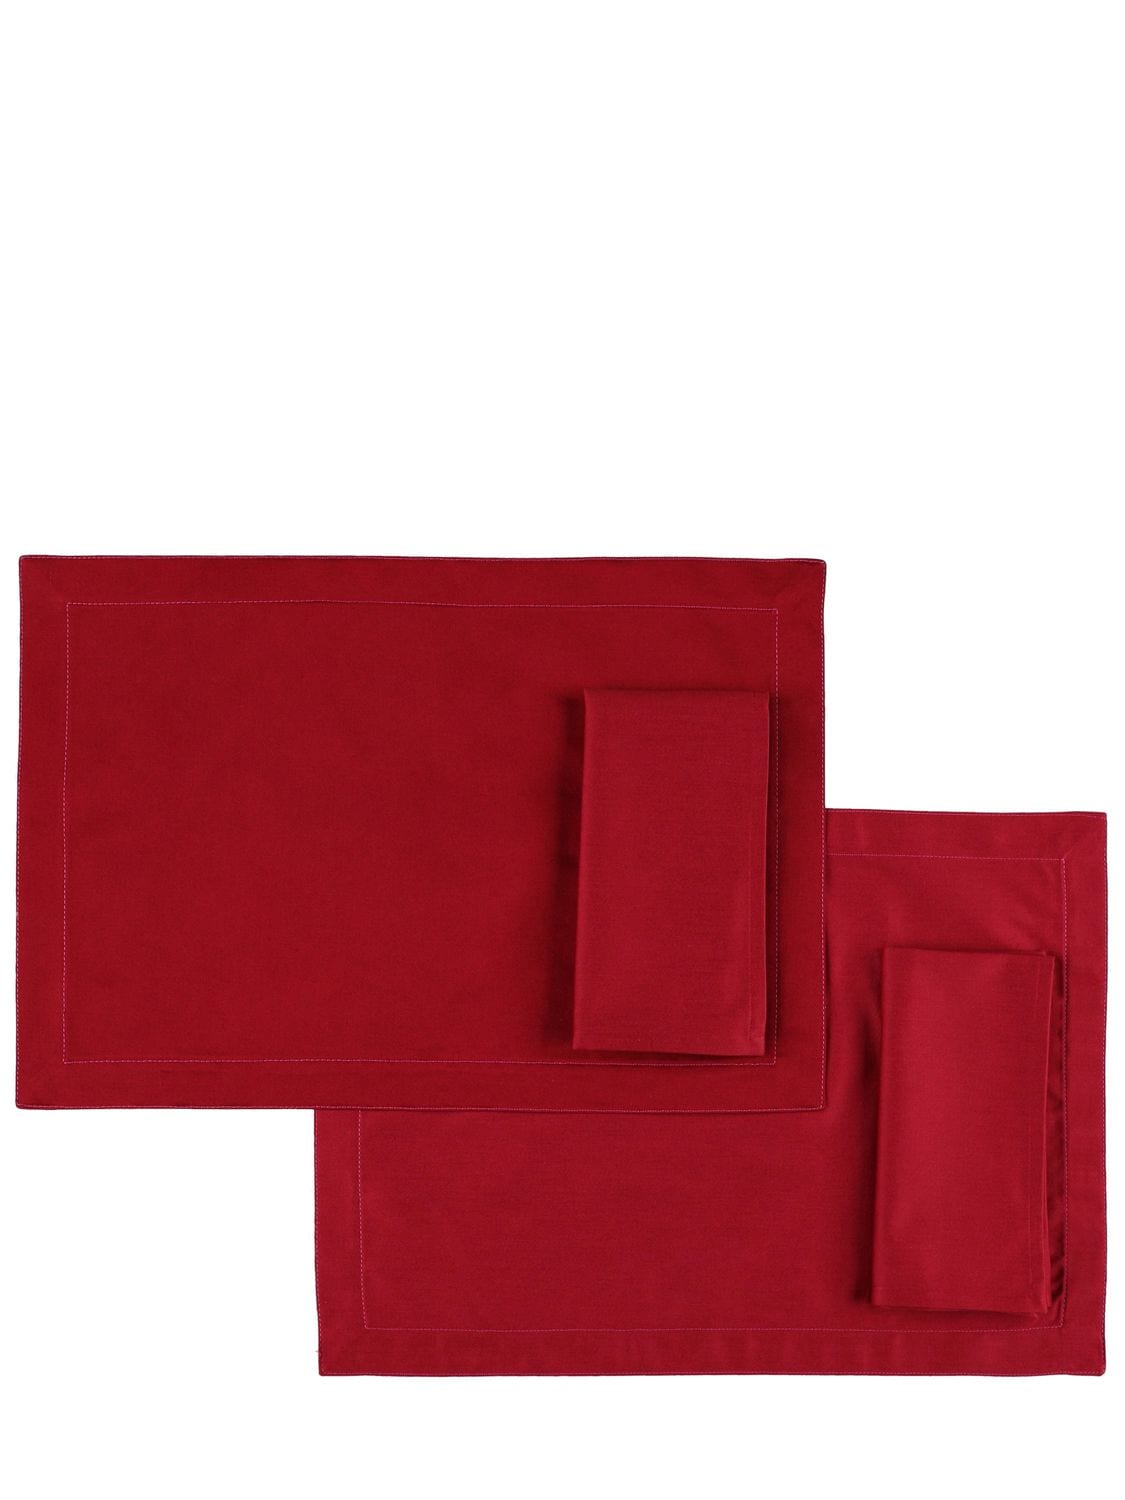 Alessandro Di Marco Set Of 2 Placemats & Napkins In Bordeaux